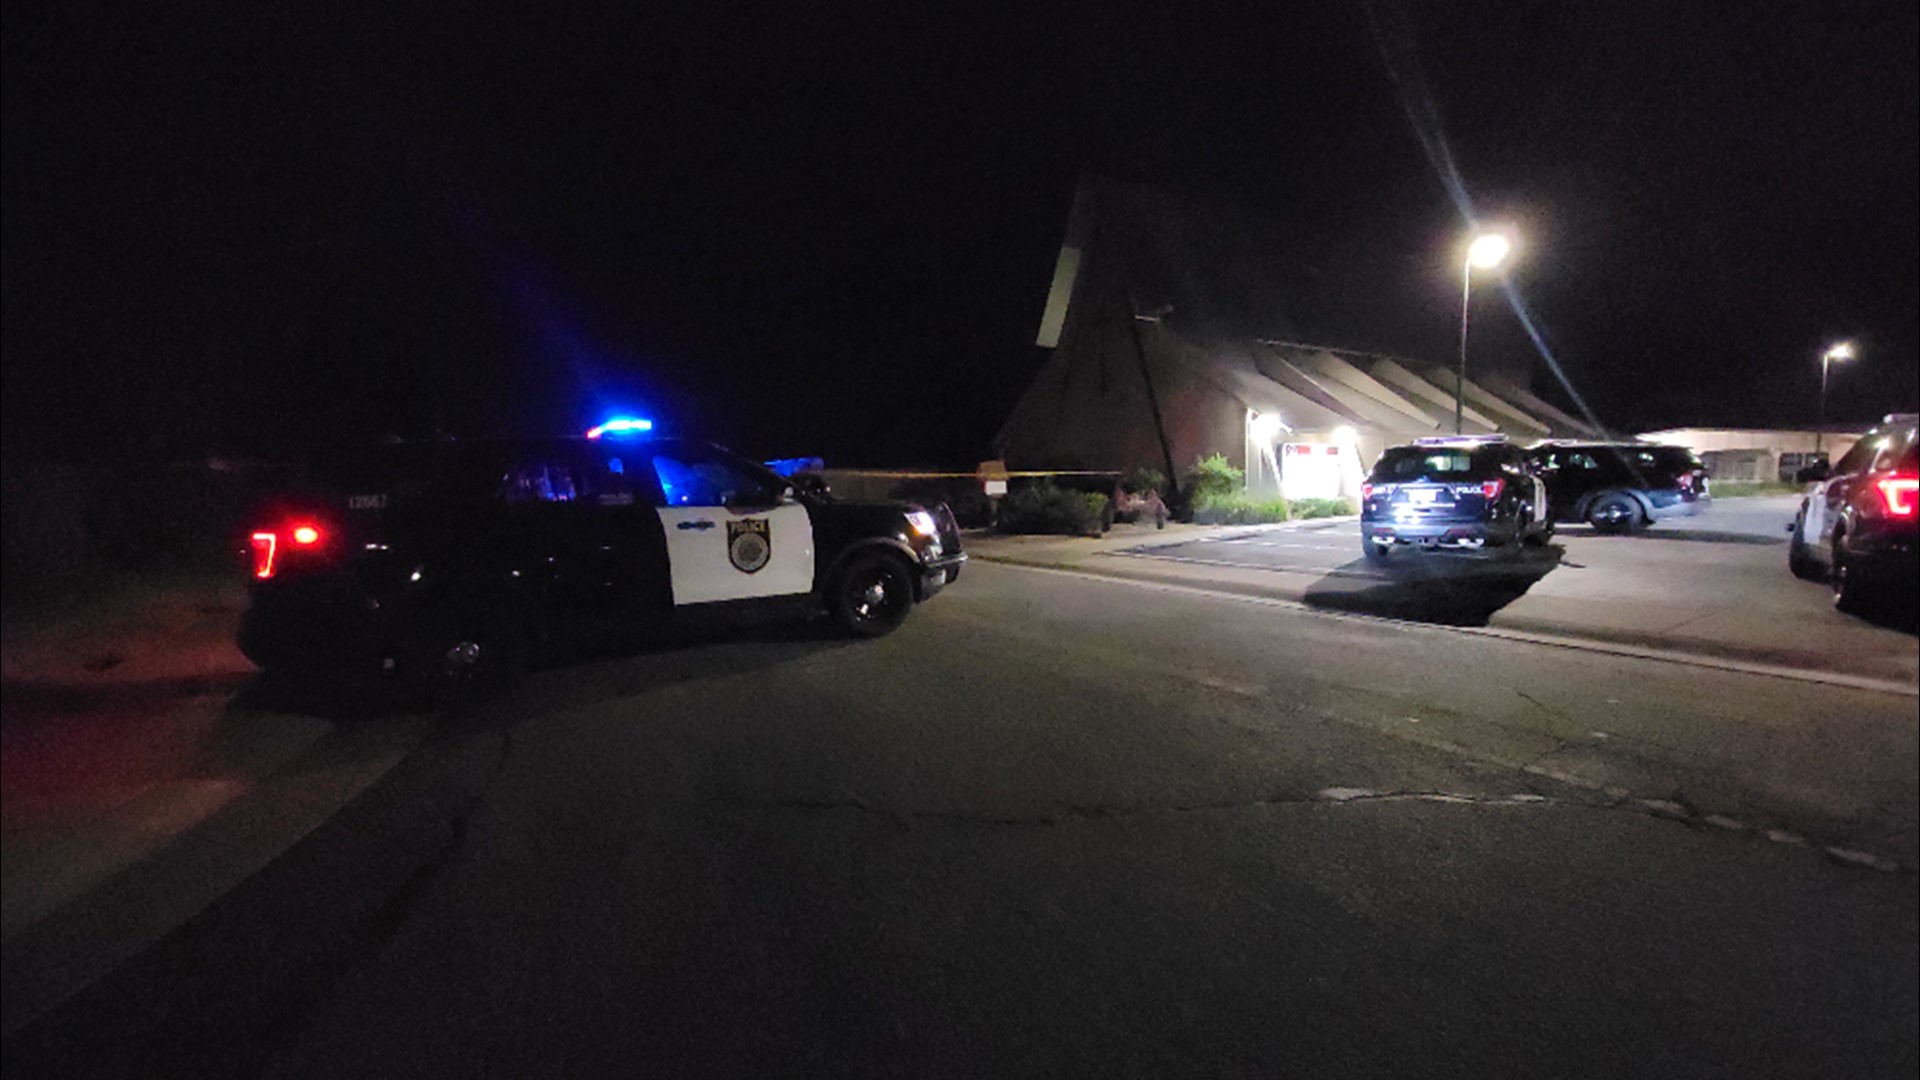 The Sacramento police department says at least one of its officers was involved in an early morning shooting on Gilgunn Way. No other details have been released.